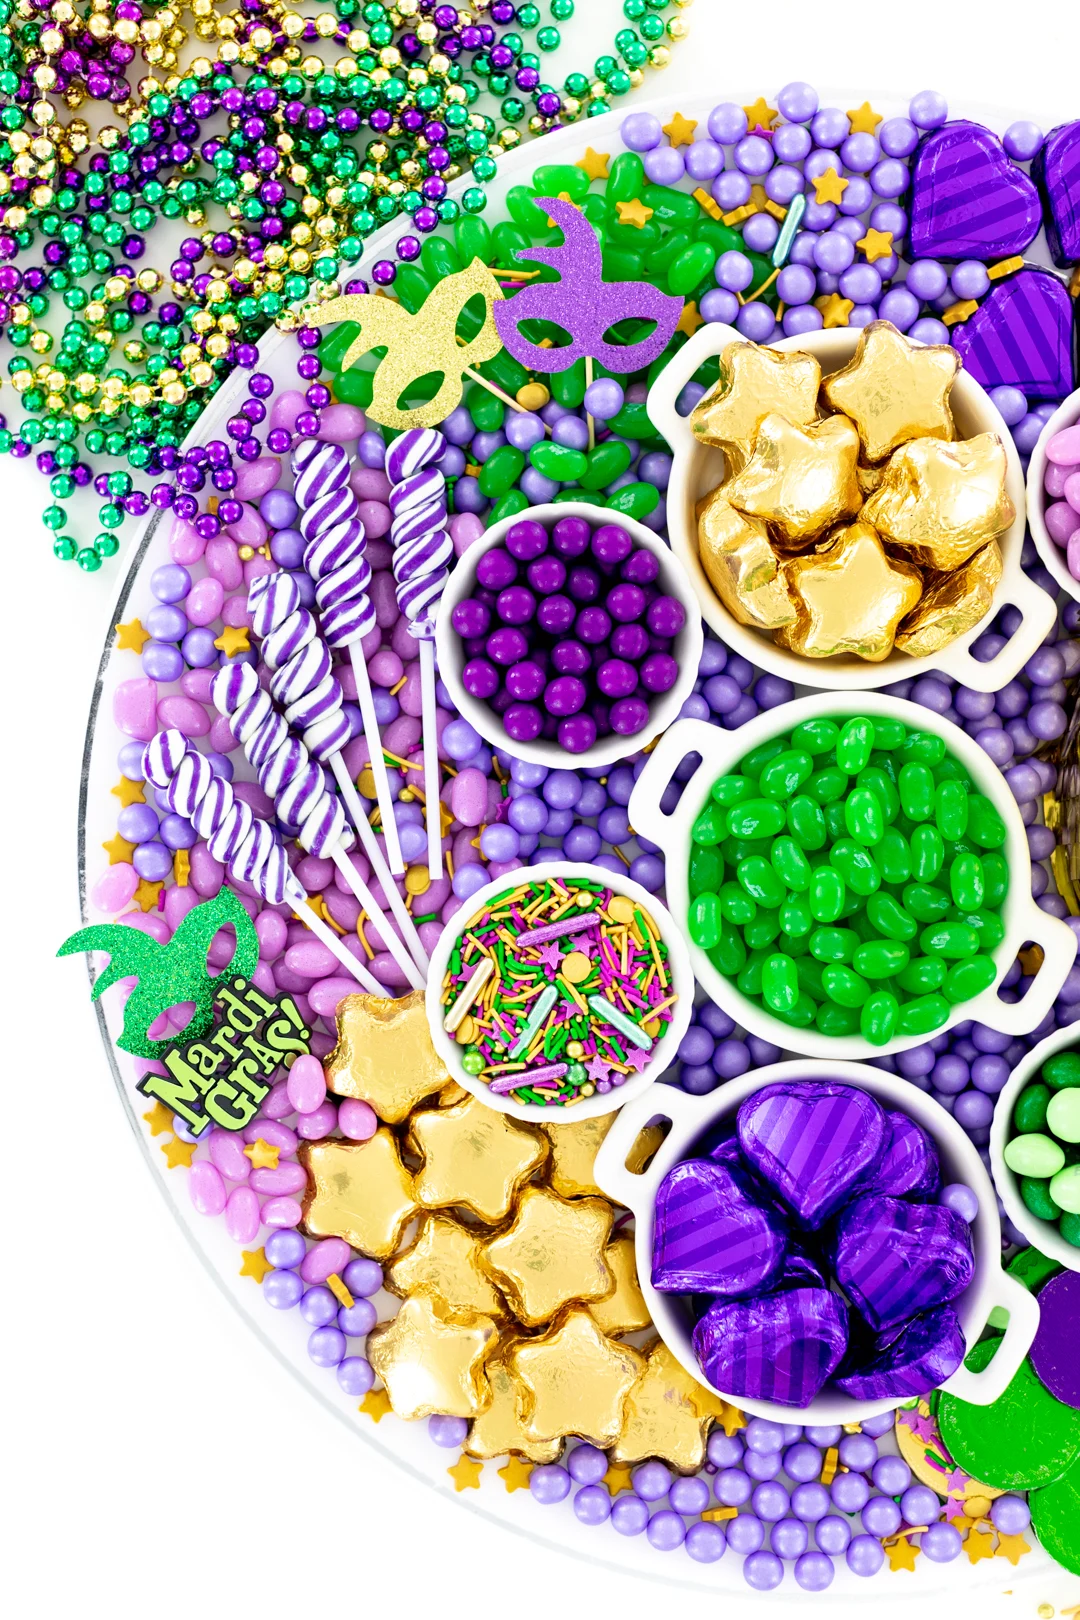 mardi gras candy grazing board with purple swirl lollipops and more green, purple and gold candies.